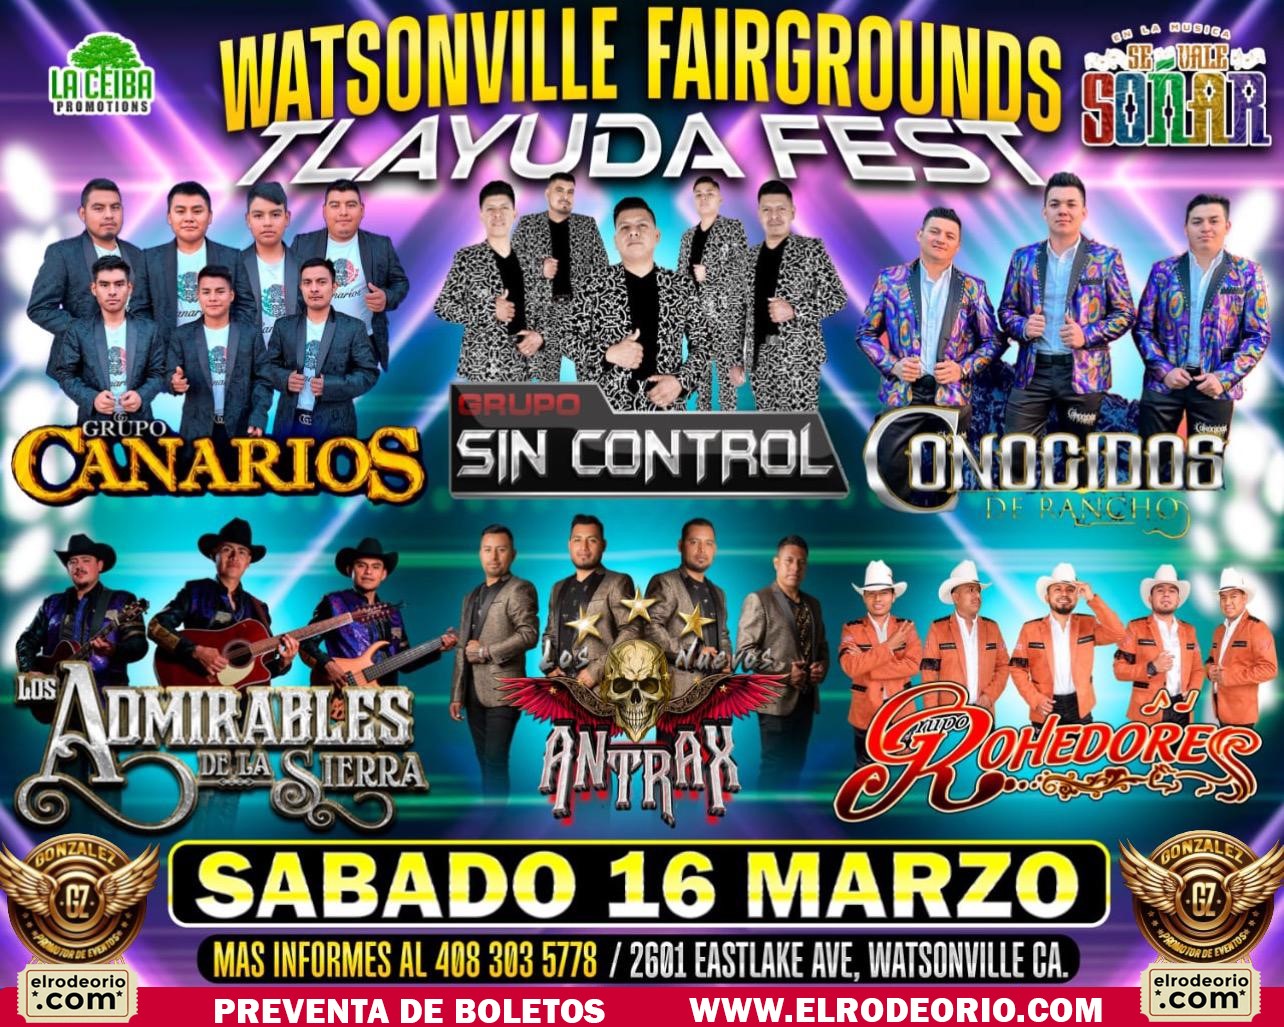 Tlayuda Fest 2024  on Mar 16, 13:00@Watsonville Fairgrounds - Buy tickets and Get information on elrodeorio.com sanjoseentertainment